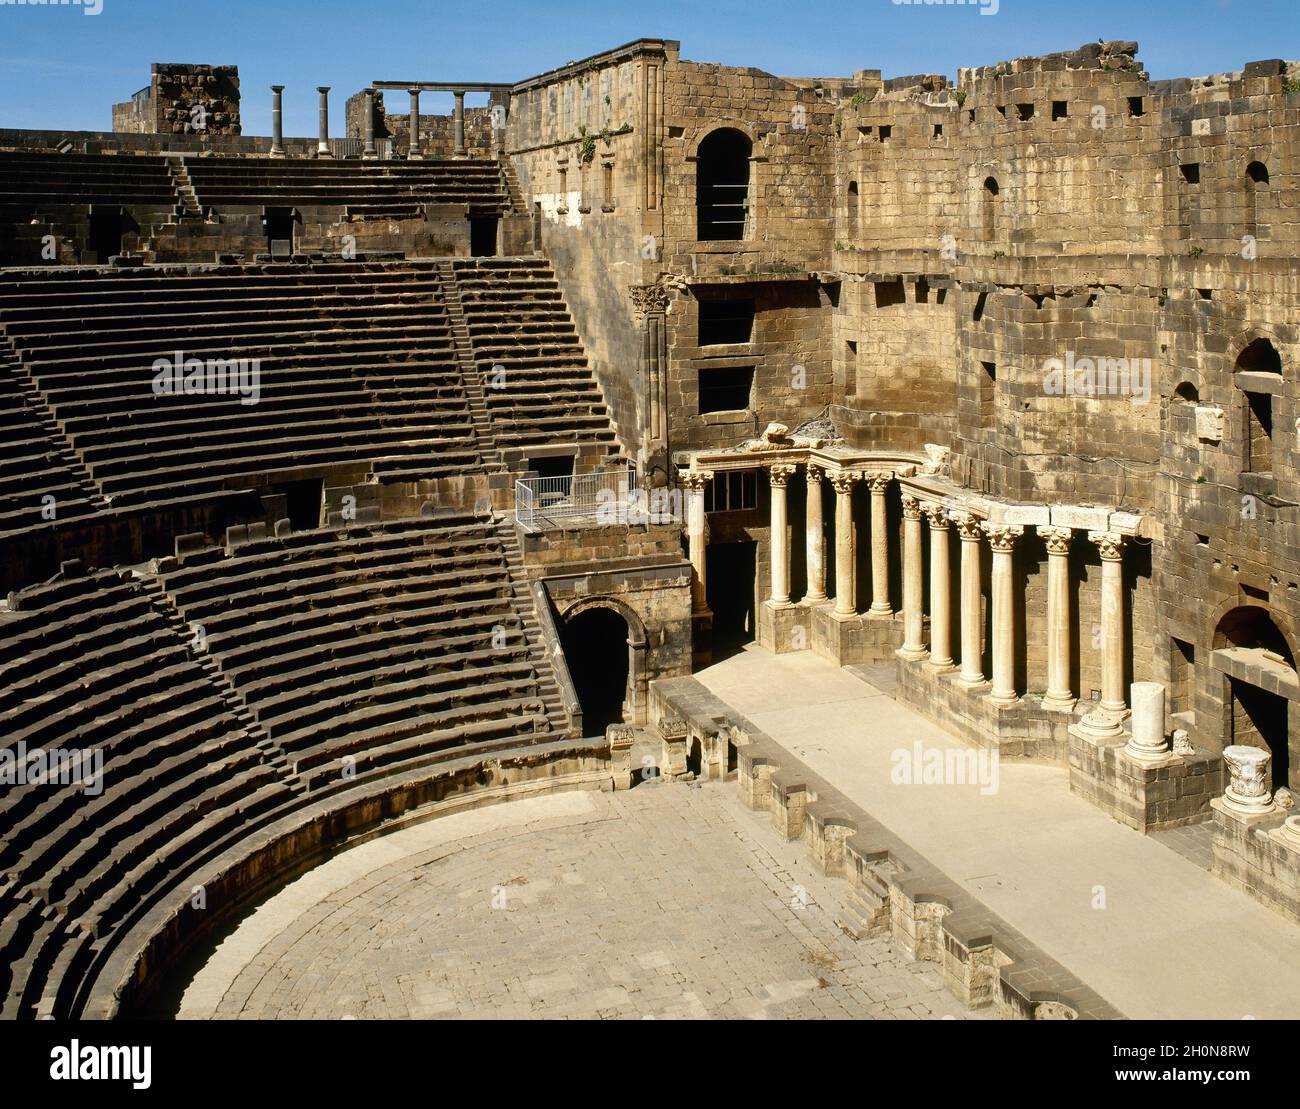 Syria. Bosra. Roman Theatre. It was constructed using black basalt. 2nd century AD, during the reign of Trajan. Photo taken before the Syrian civil wa Stock Photo